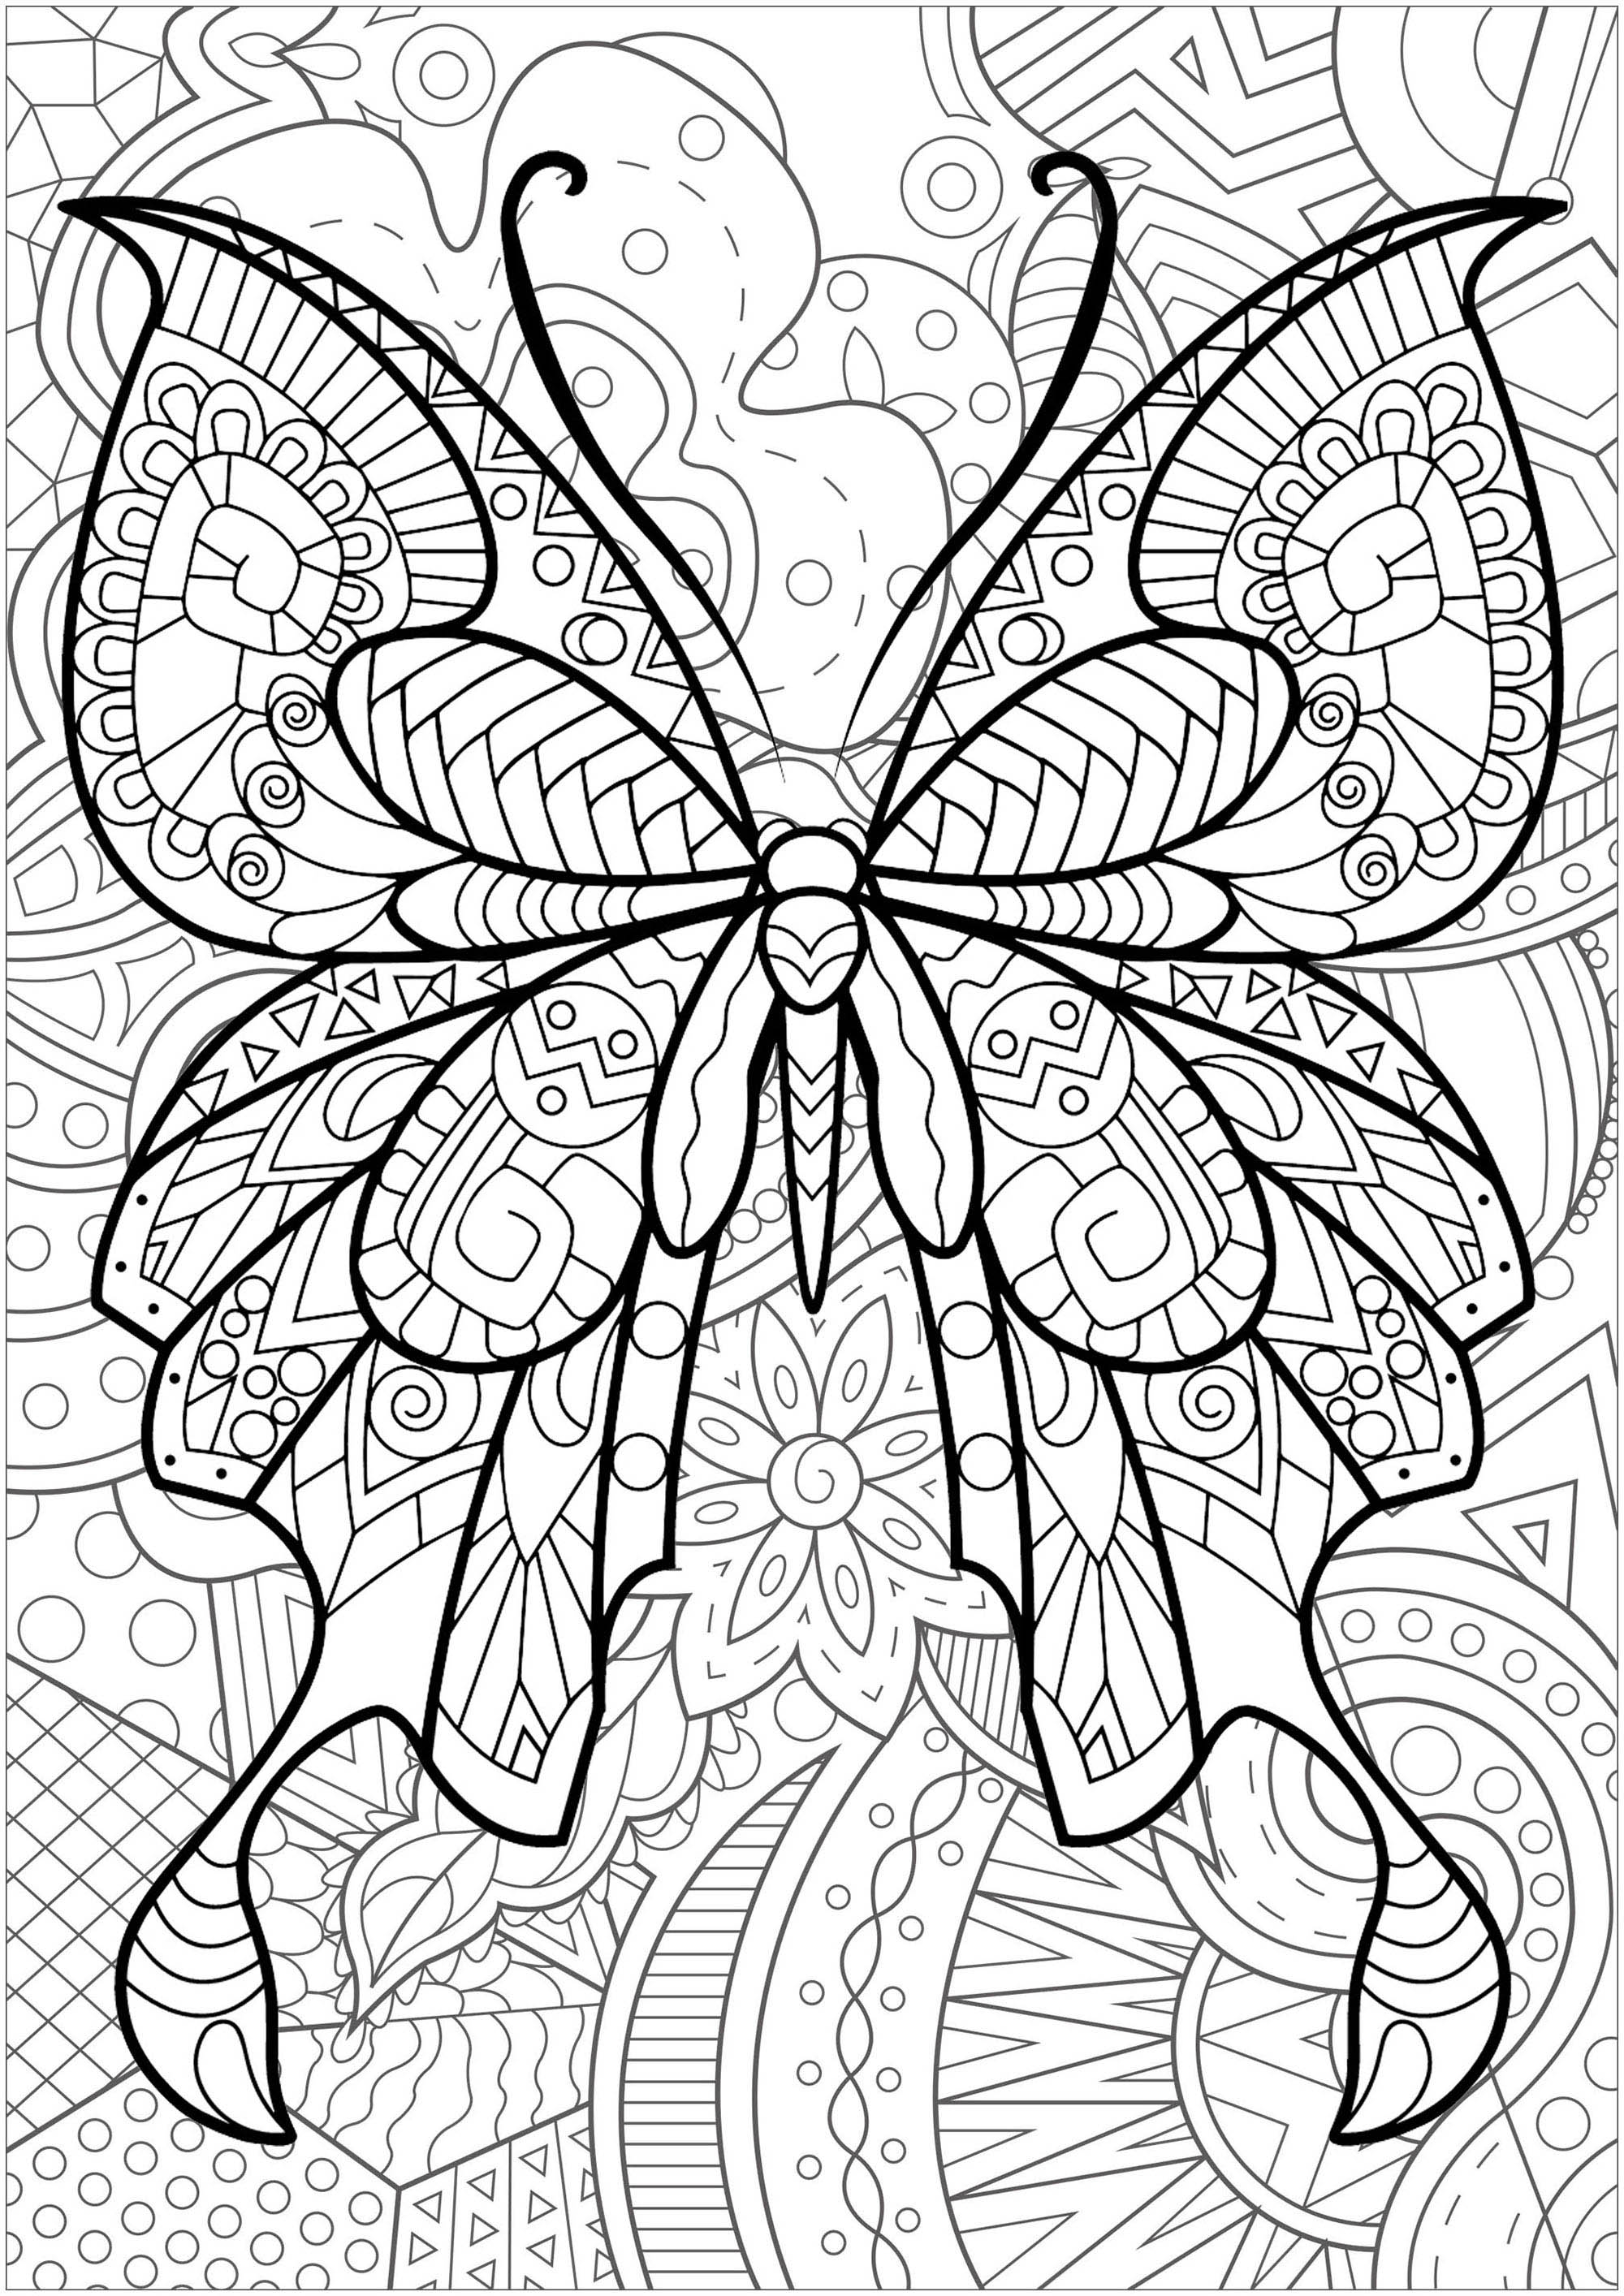 Butterfly with patterns inside and magnificent flowered background - 2